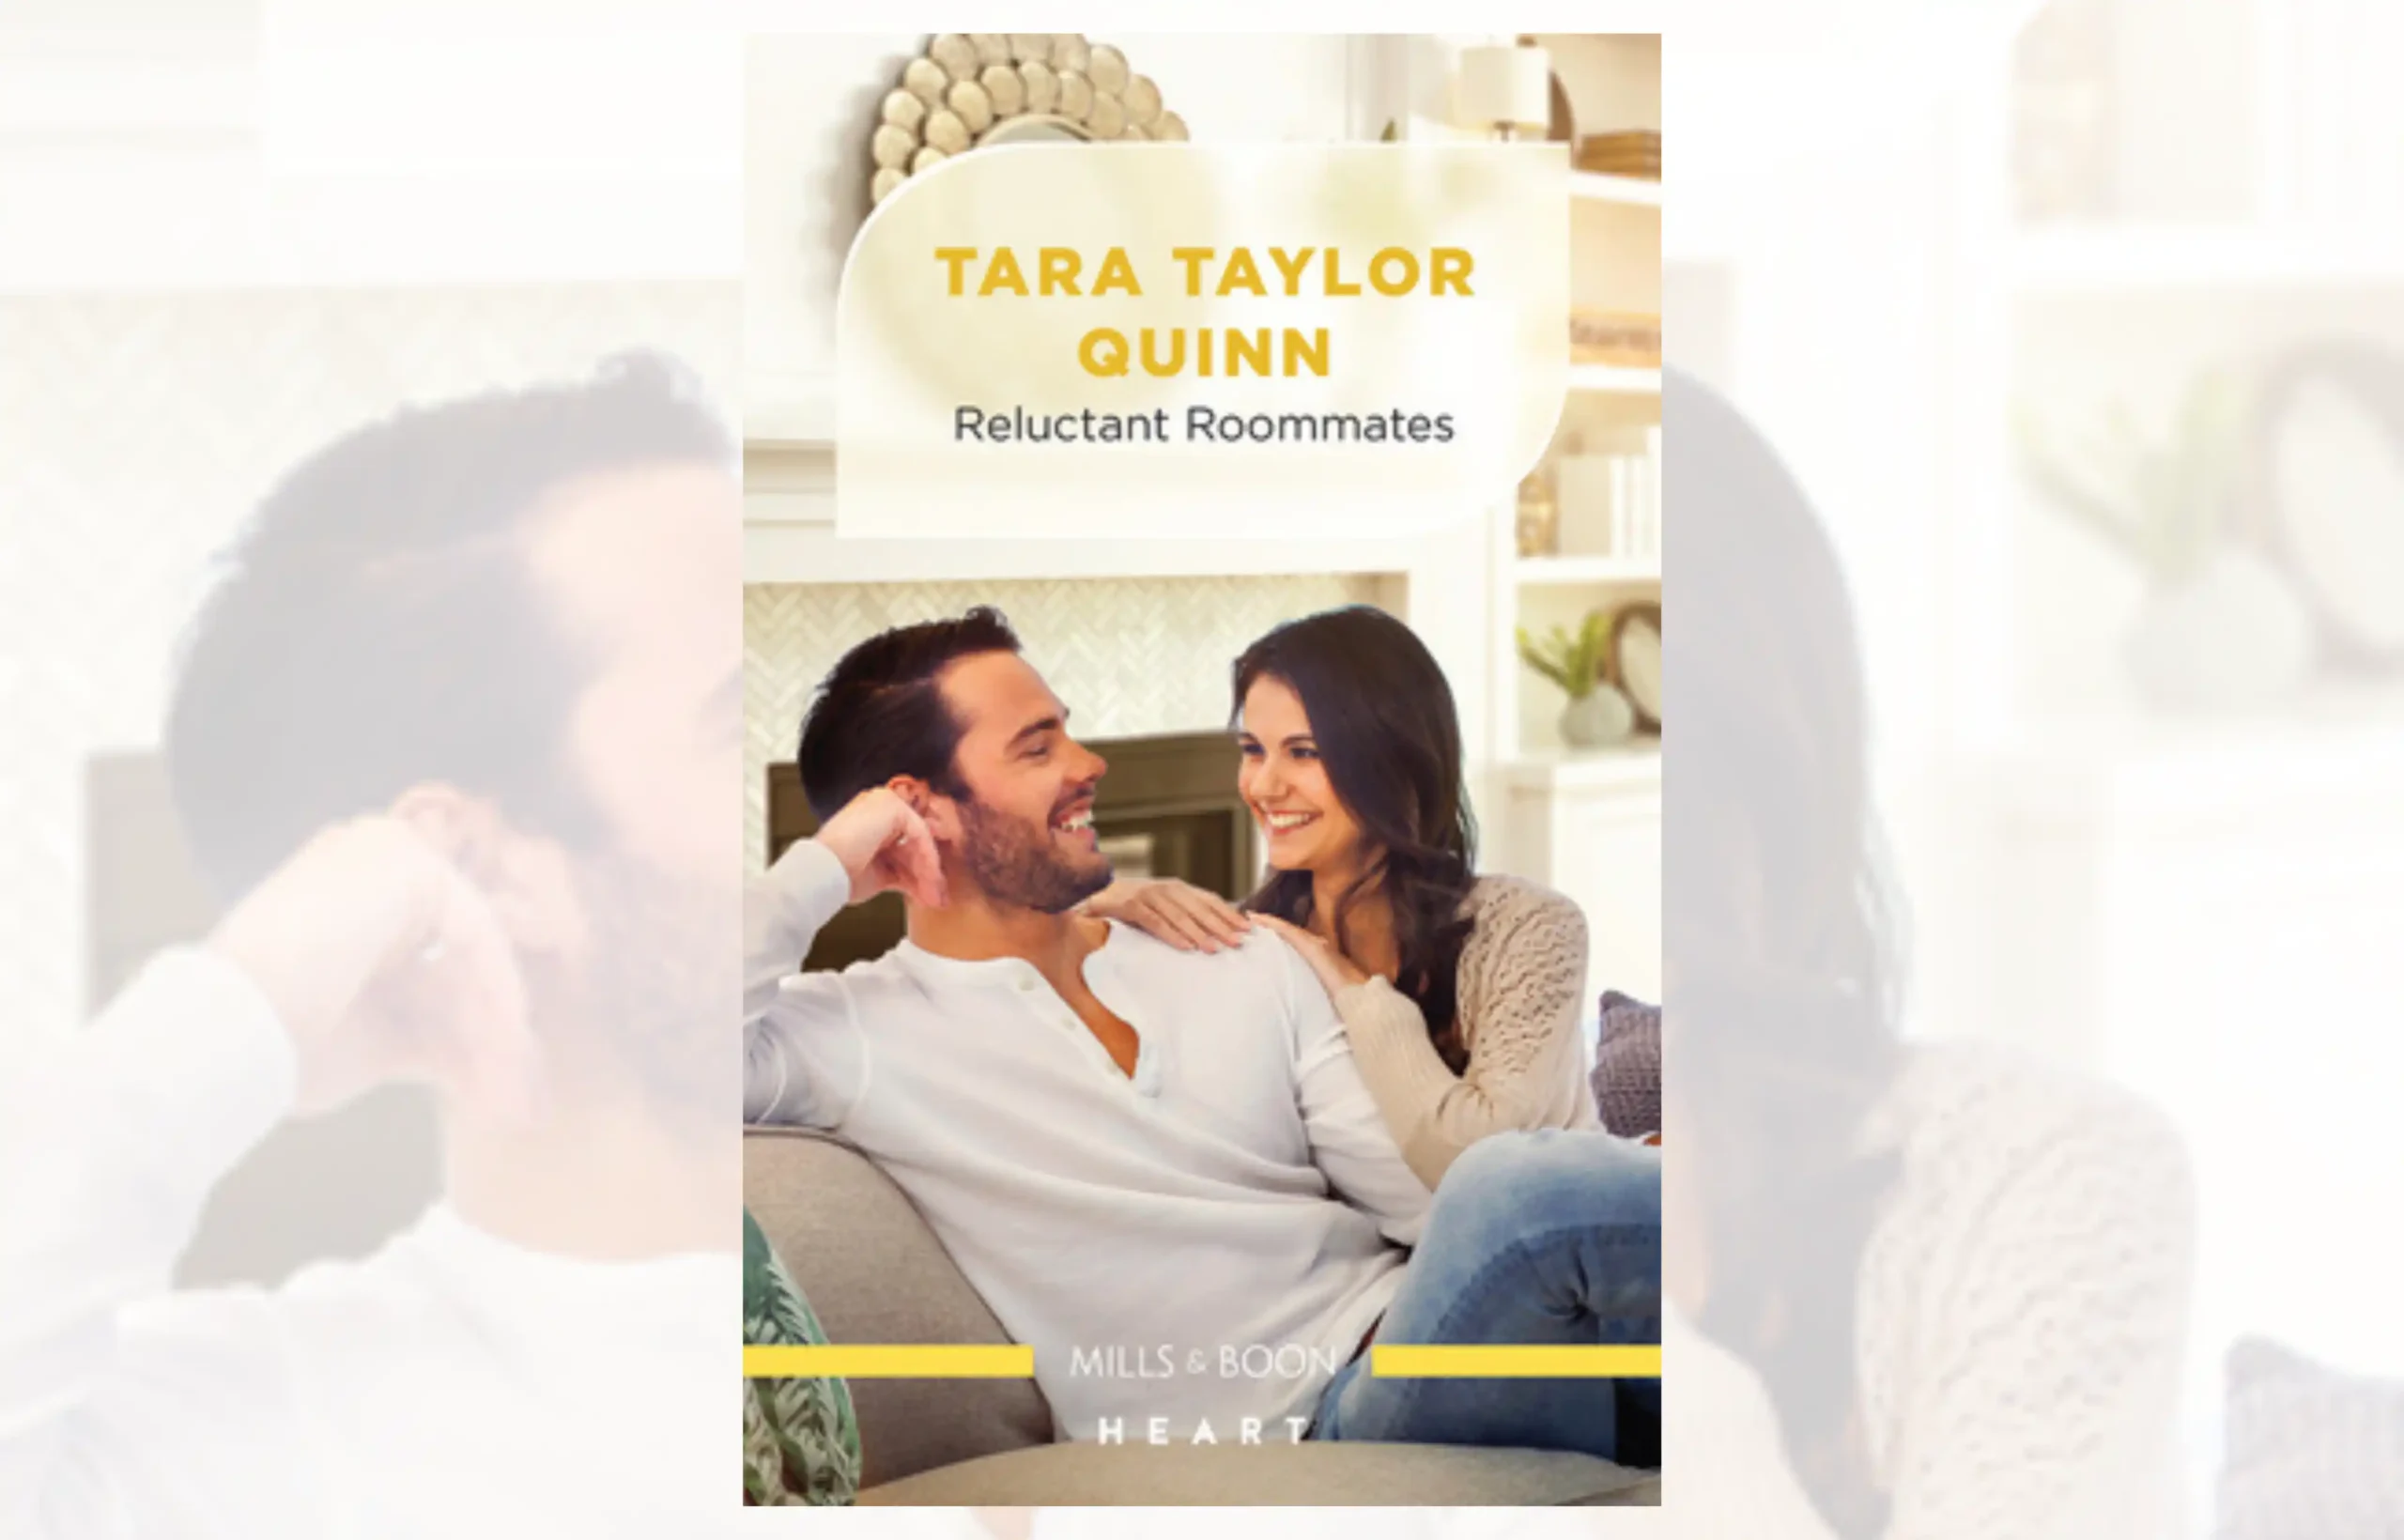 Review: Reluctant Roommates by Tara Taylor Quinn